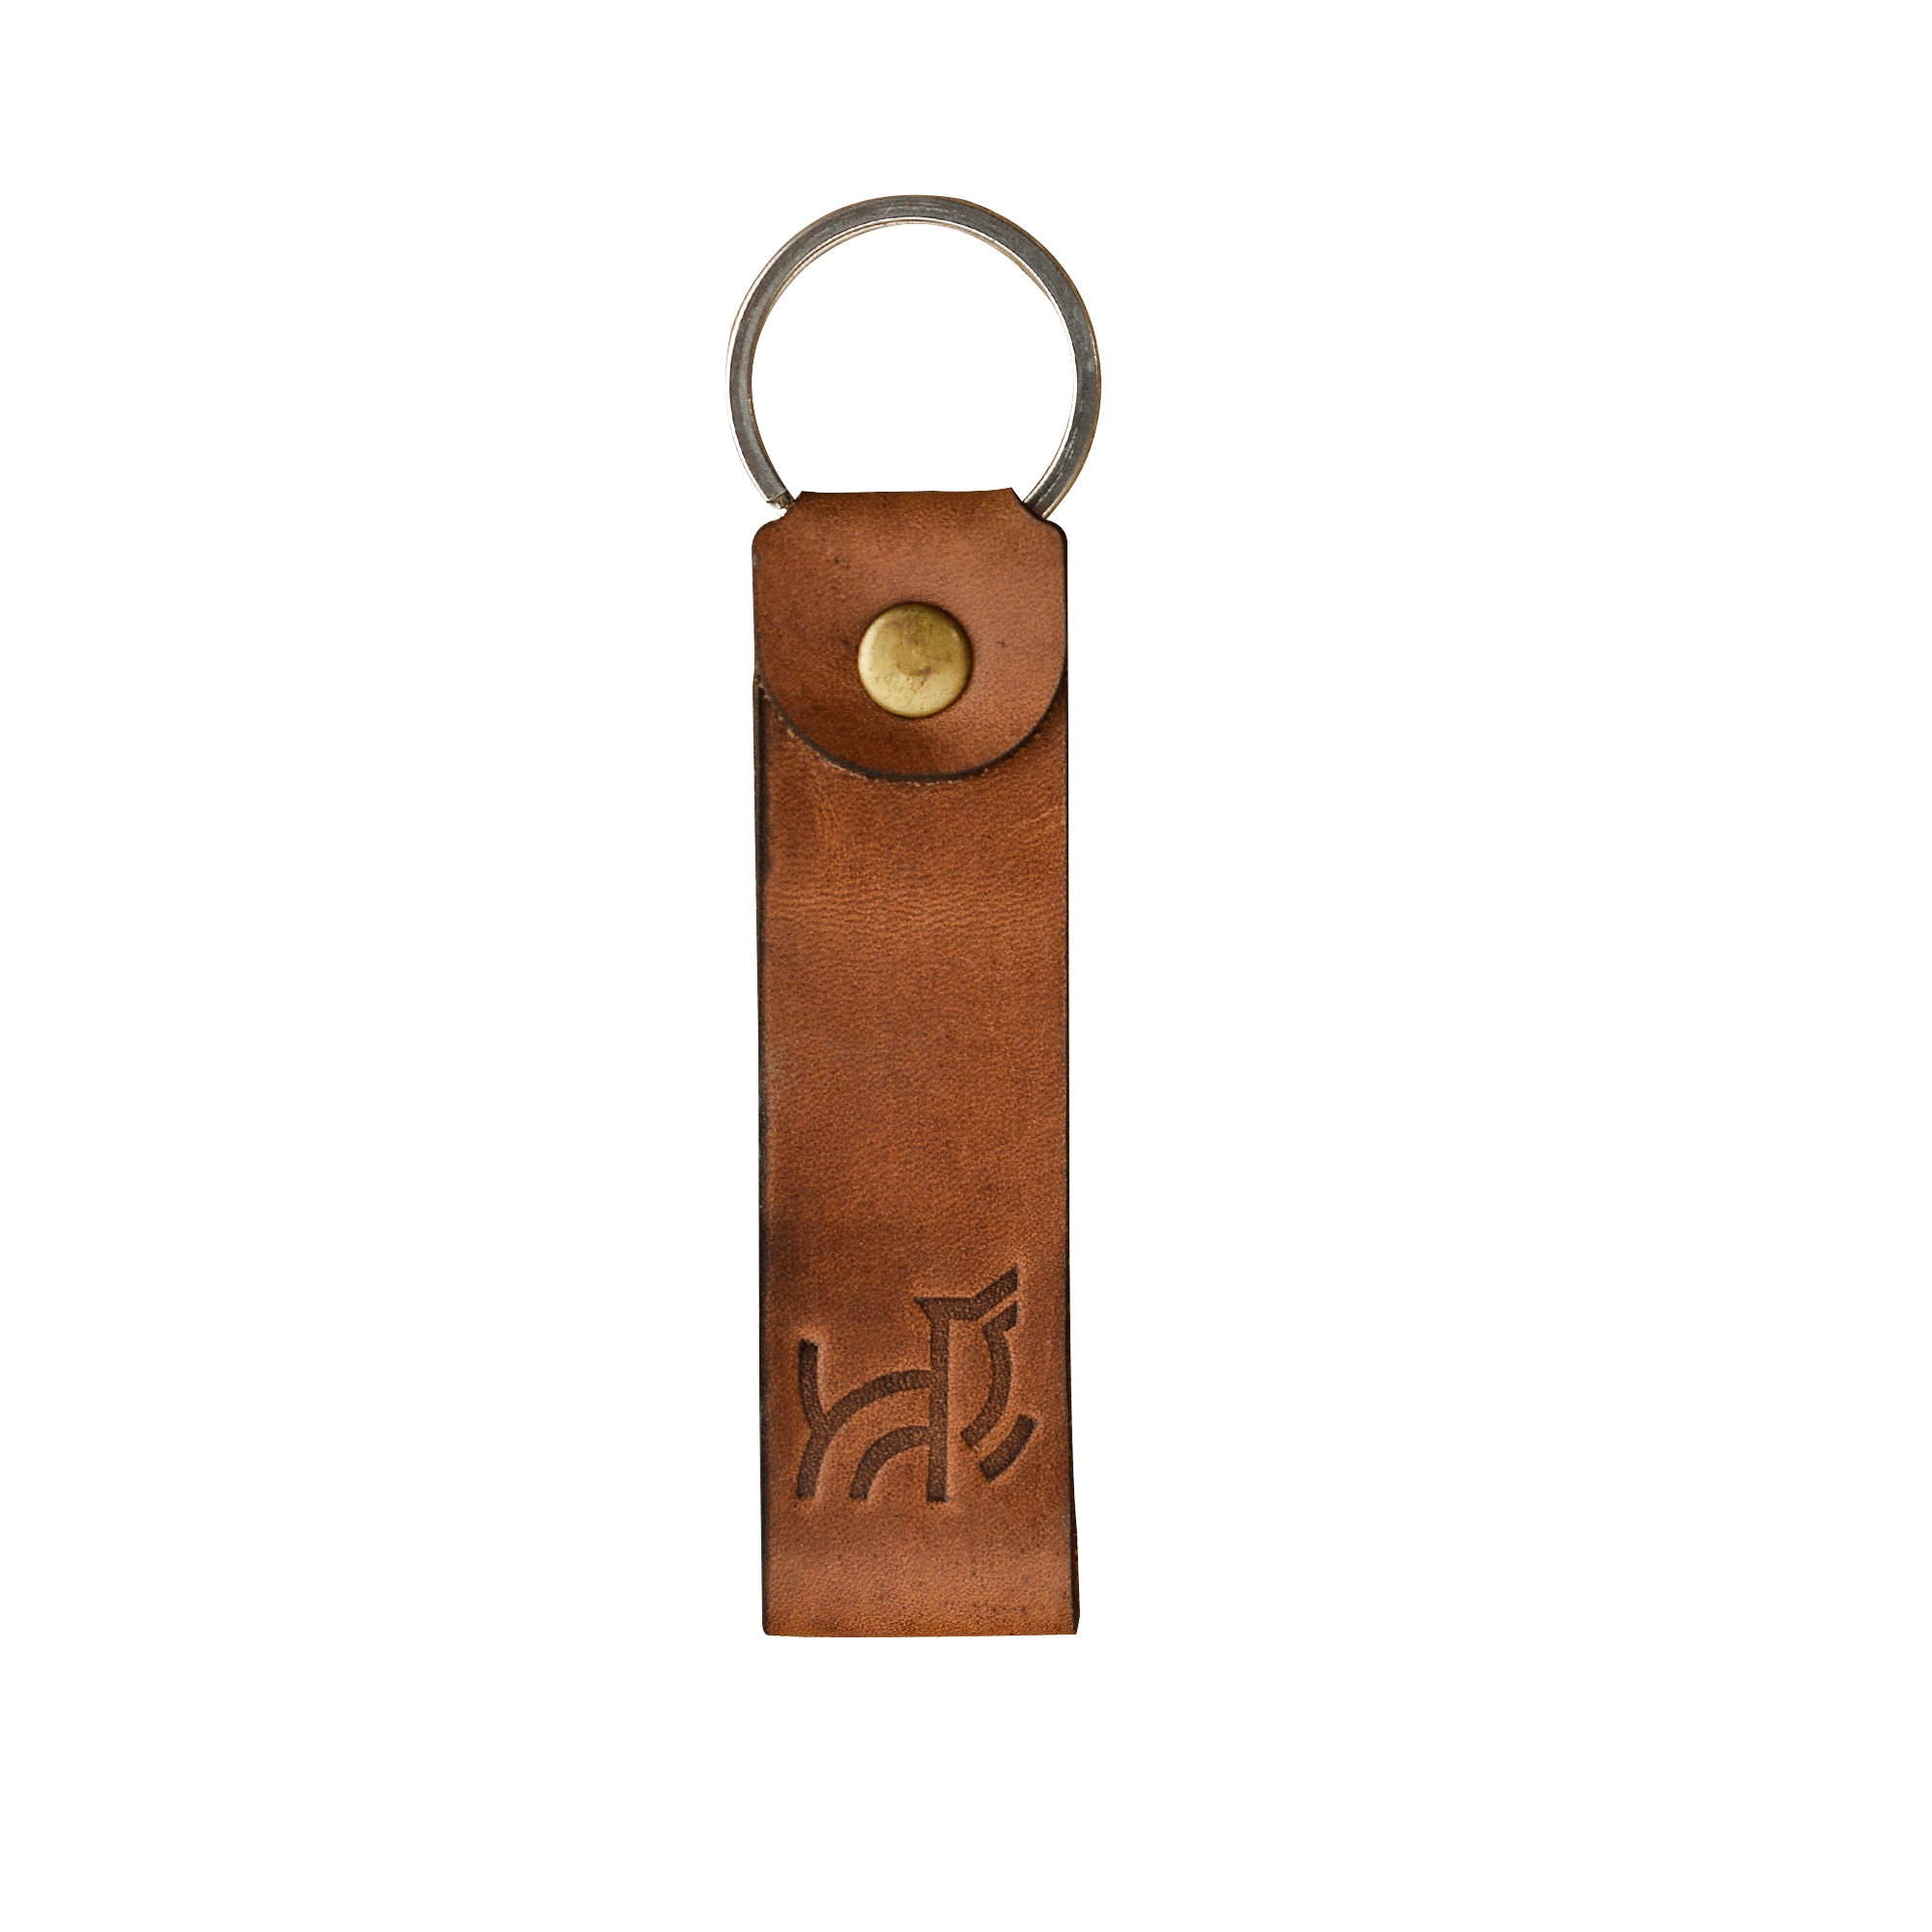 Wolf Keychain Leather For Car Home Key Ring Strap Holder Lanyard Women Men - Minimalist Leather Key Chains - Luxury Leather Keychains Wristlet Keychain For Women Men Leather Wristlet Strap For Wallet Car Keys Backpacks Cute Lanyard In Brown & Coffee Color